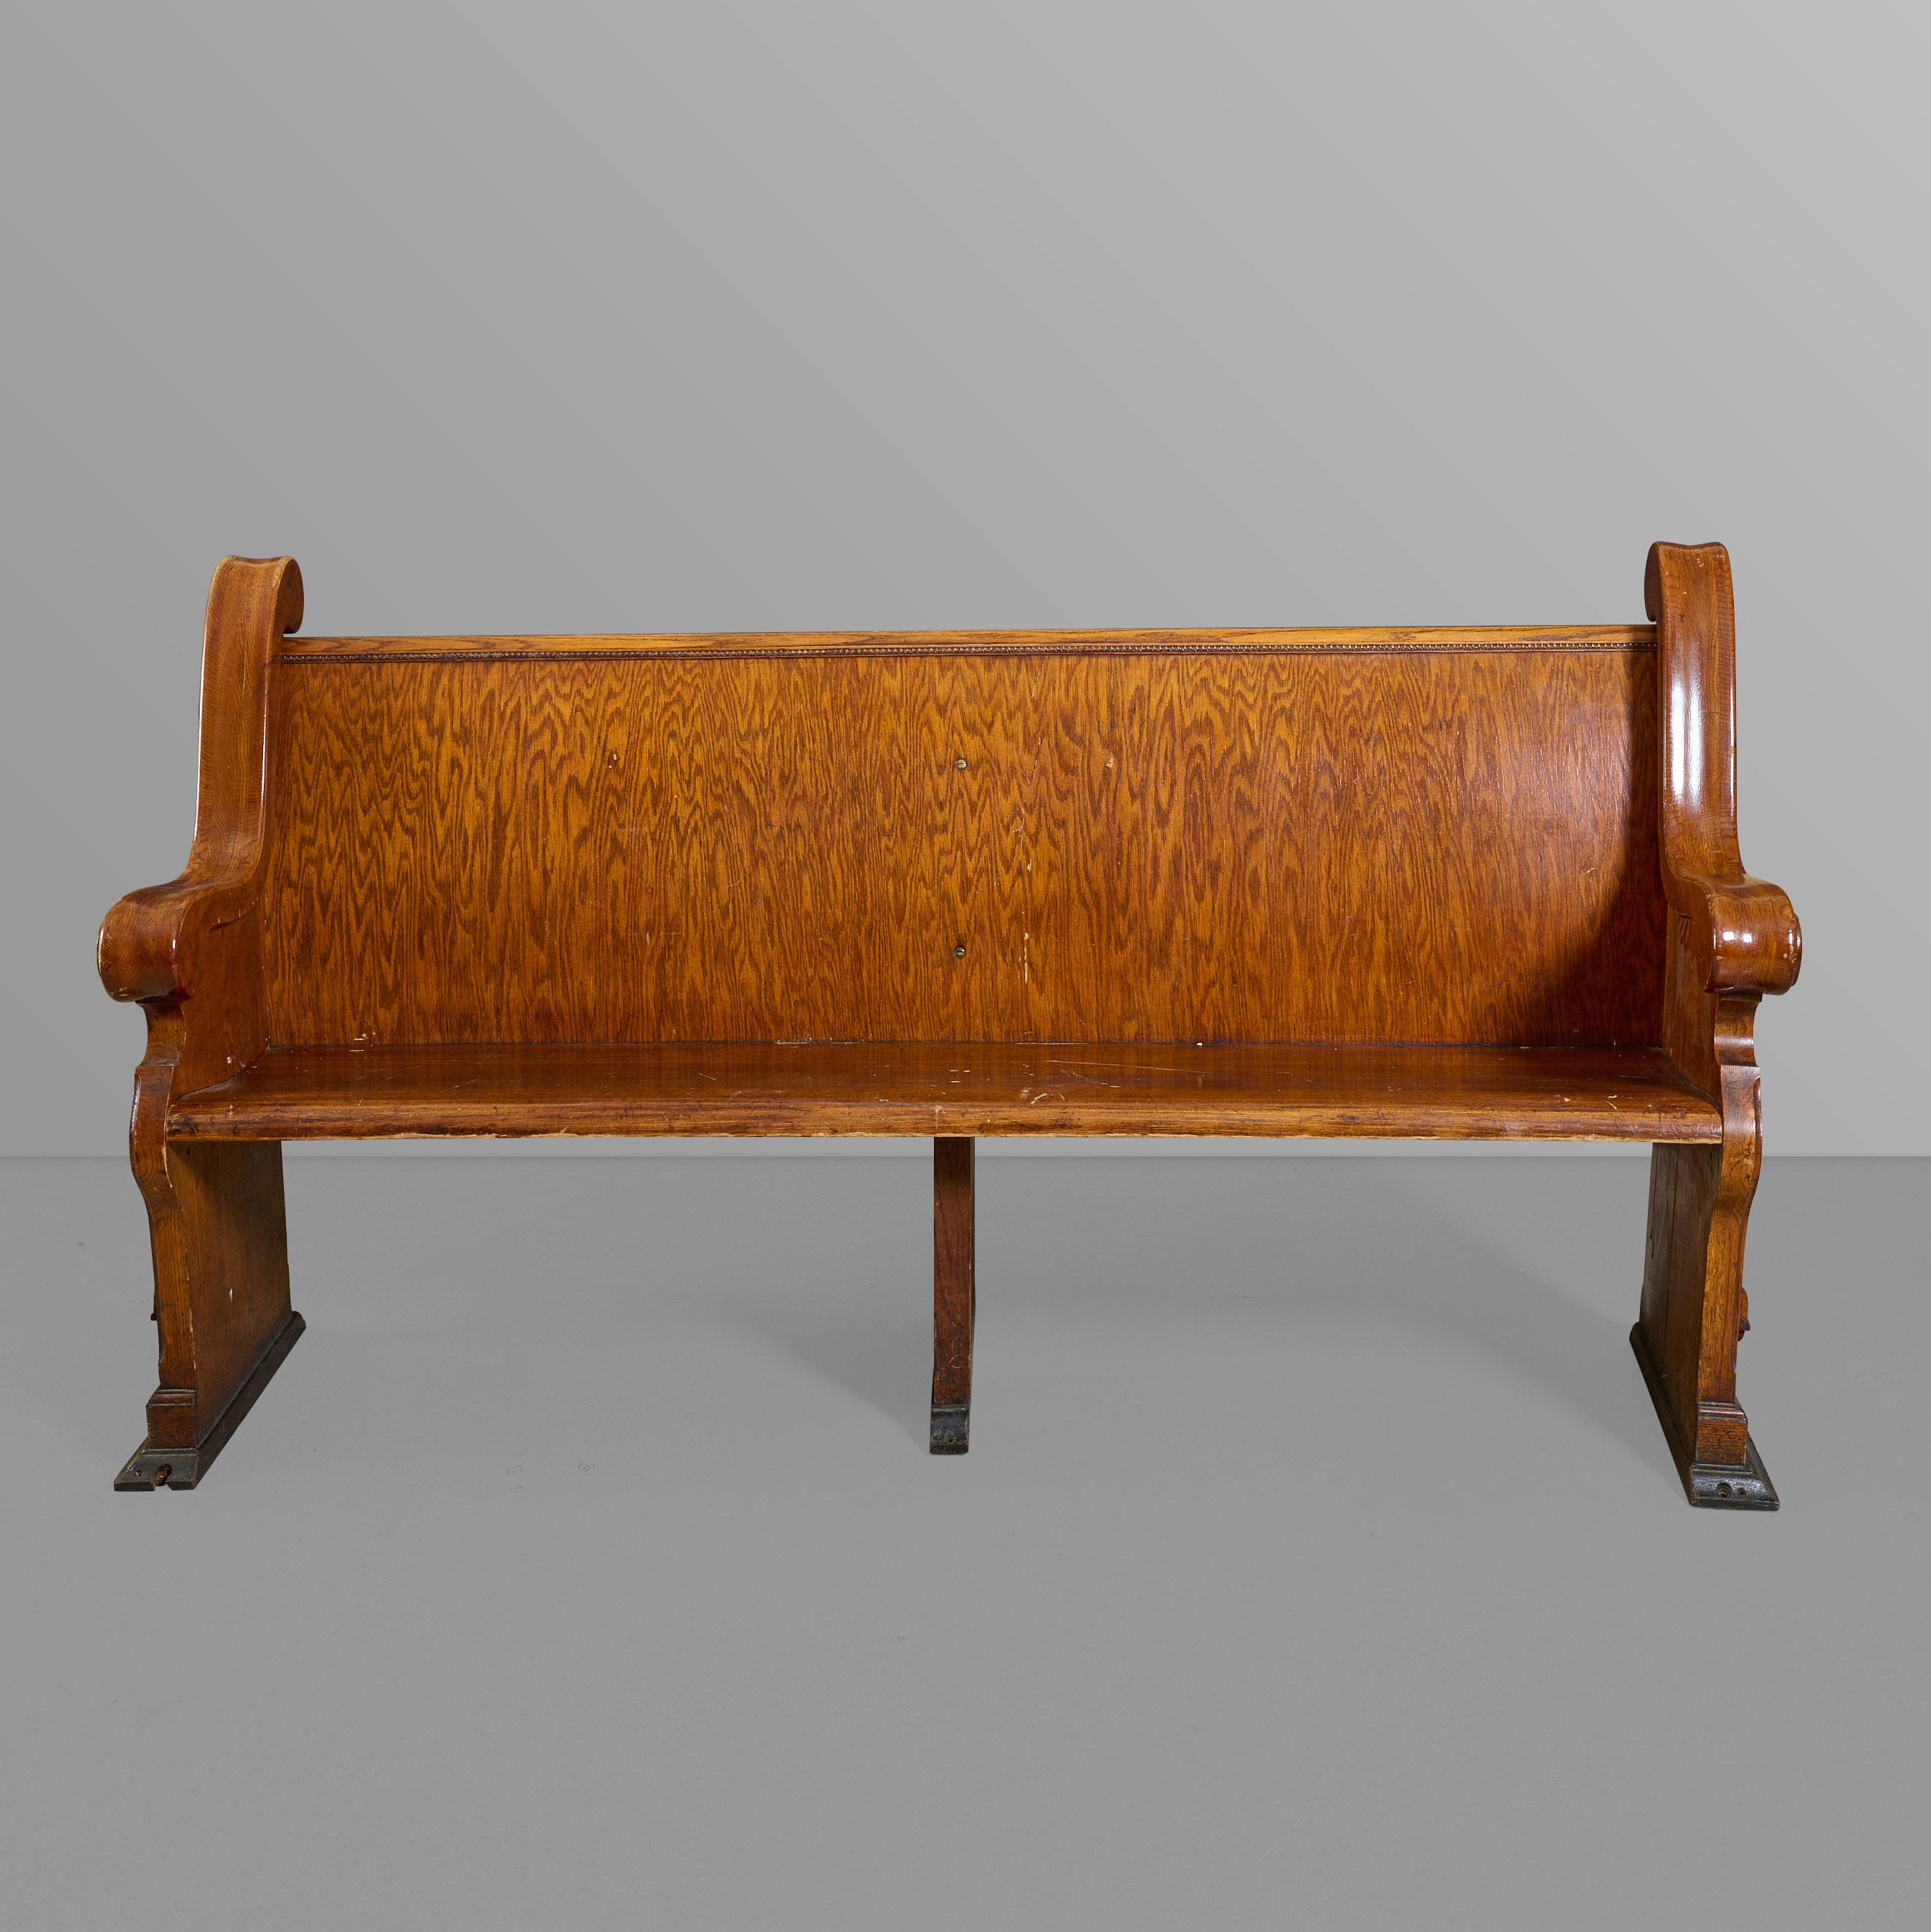 Oak church pew with heavily carved ends. Many available in various sizes.

